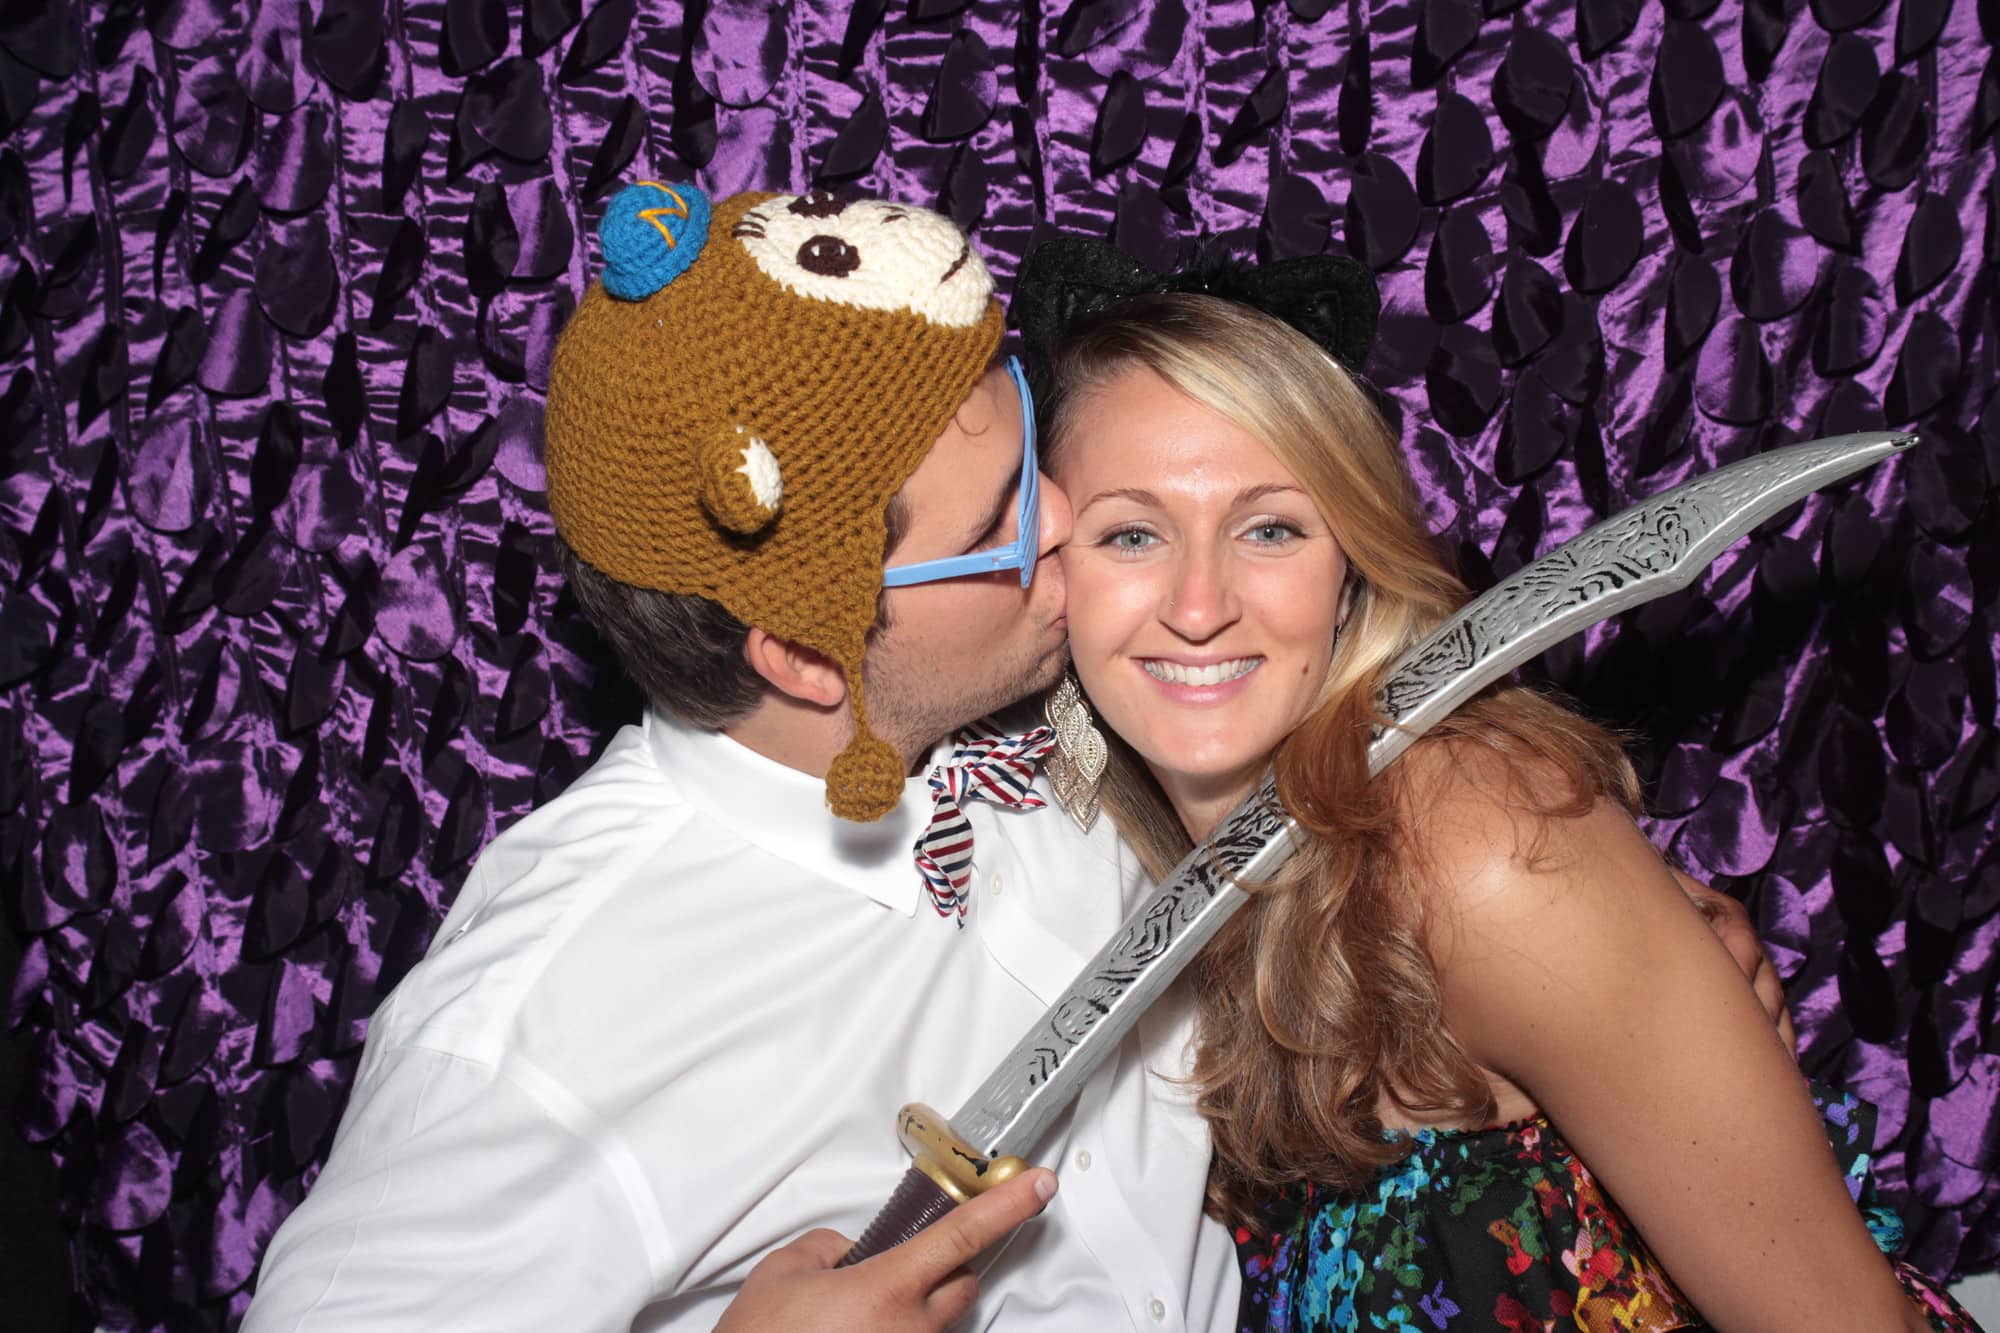 Photo-Booth-Rental-Austin-Dripping Springs-Weddings-Reception-Parties-LGBT- Affordable-No.1-ATXDJ-Best